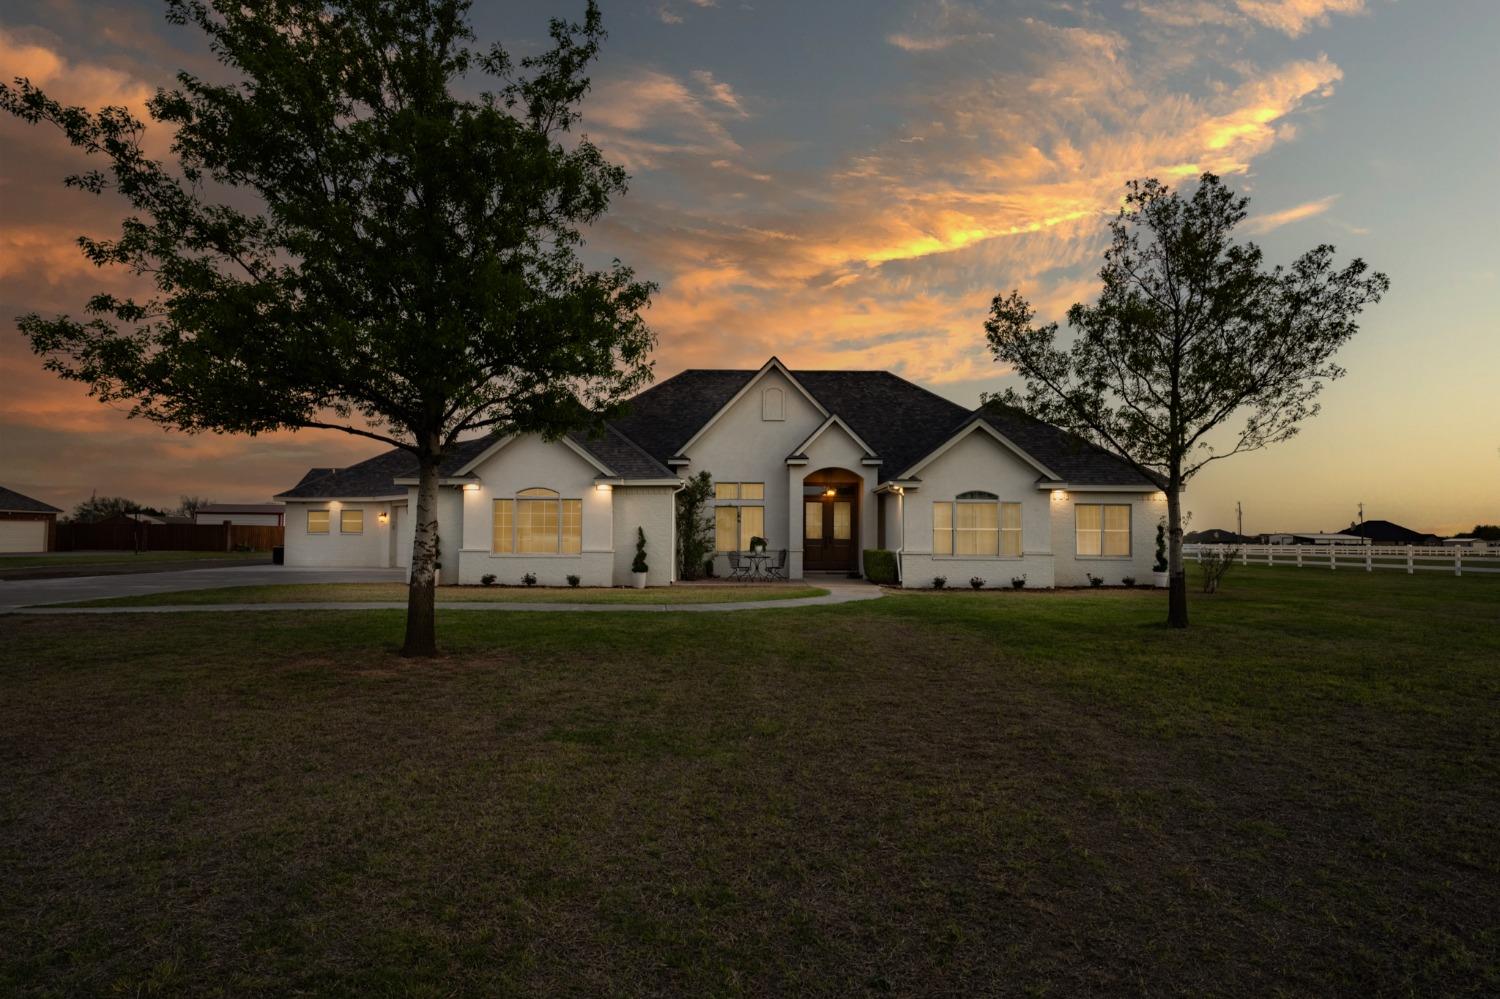 Are you looking for your own piece of West Texas? This beautiful 5/3.5/3 + basement in Saddle Club allows horses and has so many extras! Seated on 2+ acres with established trees and landscaping, the home has great curb appeal. Inside you'll find a well-designed floor plan with 2 living areas and an office flowing right into the dining room and kitchen. The kitchen is a chef's dream with beautiful custom cabinetry, a large island with bar seating, and quartz counters. The isolated primary suite features a bonus space leading into the room as well as a walk-in shower, double sinks and dual closets. The other bedrooms offer ample space for guests or a growing family. The backyard is a true oasis with gorgeous sunset views featuring a large covered patio, a luxurious pool and hot tub, a children's play area, and a sand volleyball pit. The home also features a 40x60 insulated shop with an office and full bathroom as well as RV hookups. Schedule a private showing today!